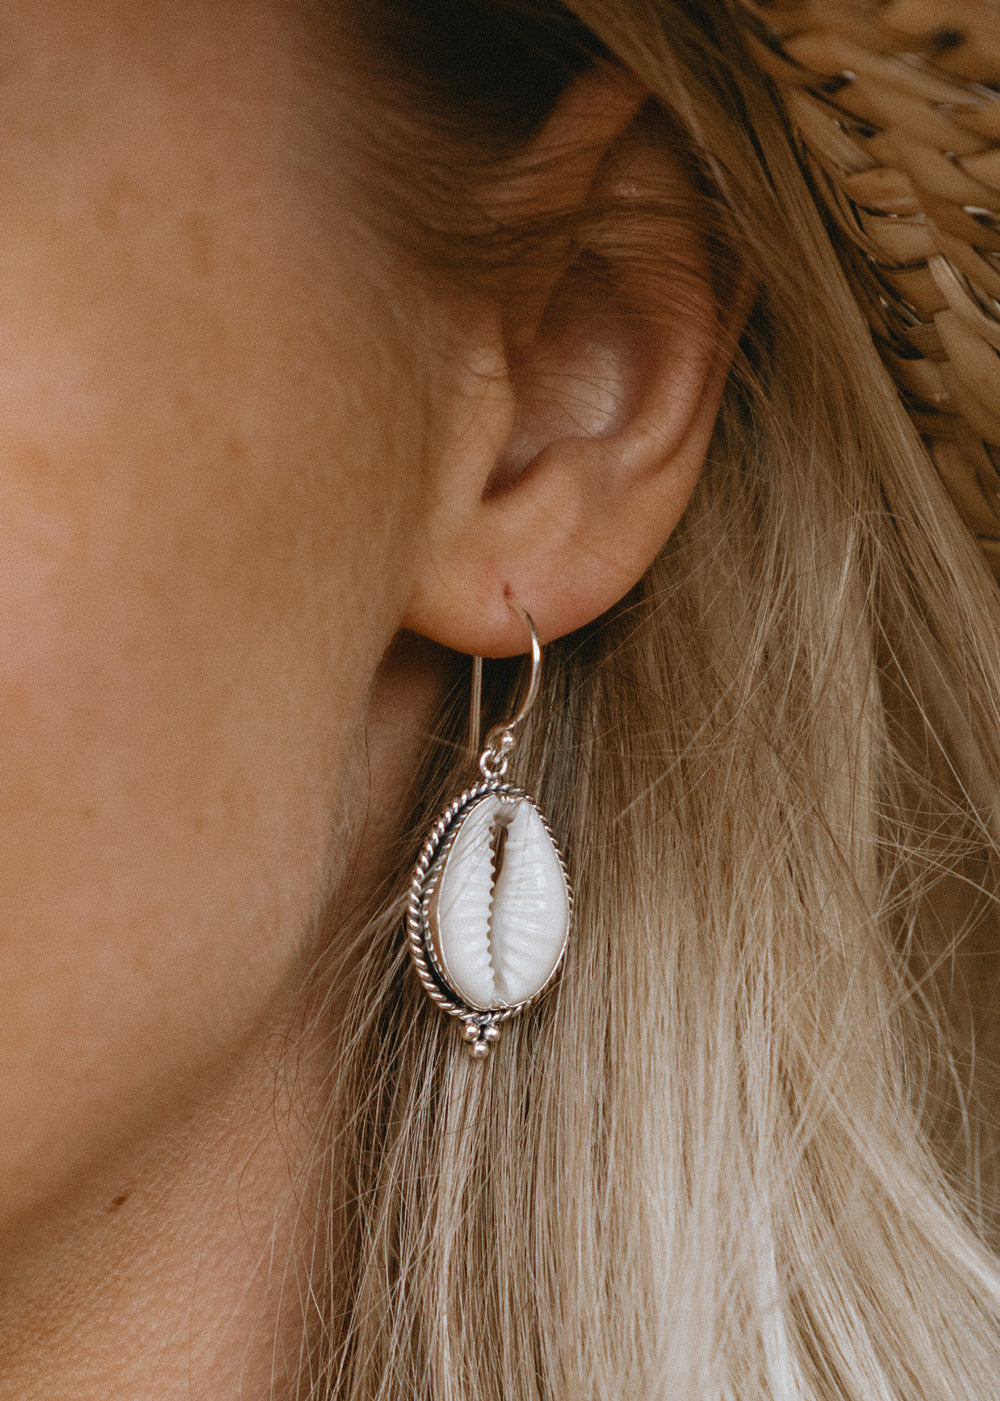 Mira Cowrie Shell Hook Earrings by Tropical Tribe